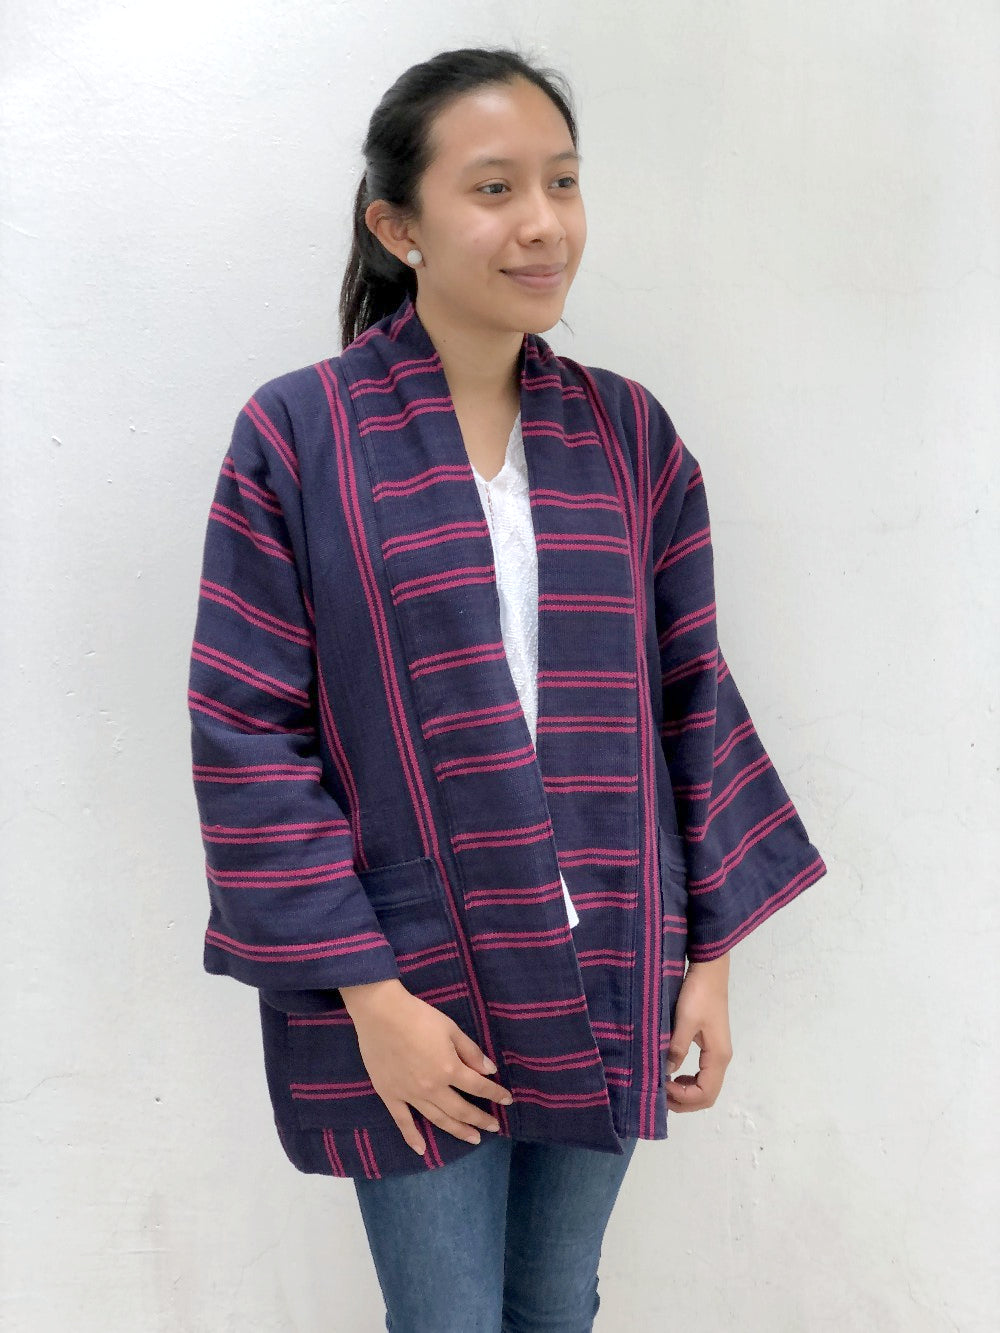 The Aiko Jacket: Classic Indigo + Cochineal Red Lines S/M